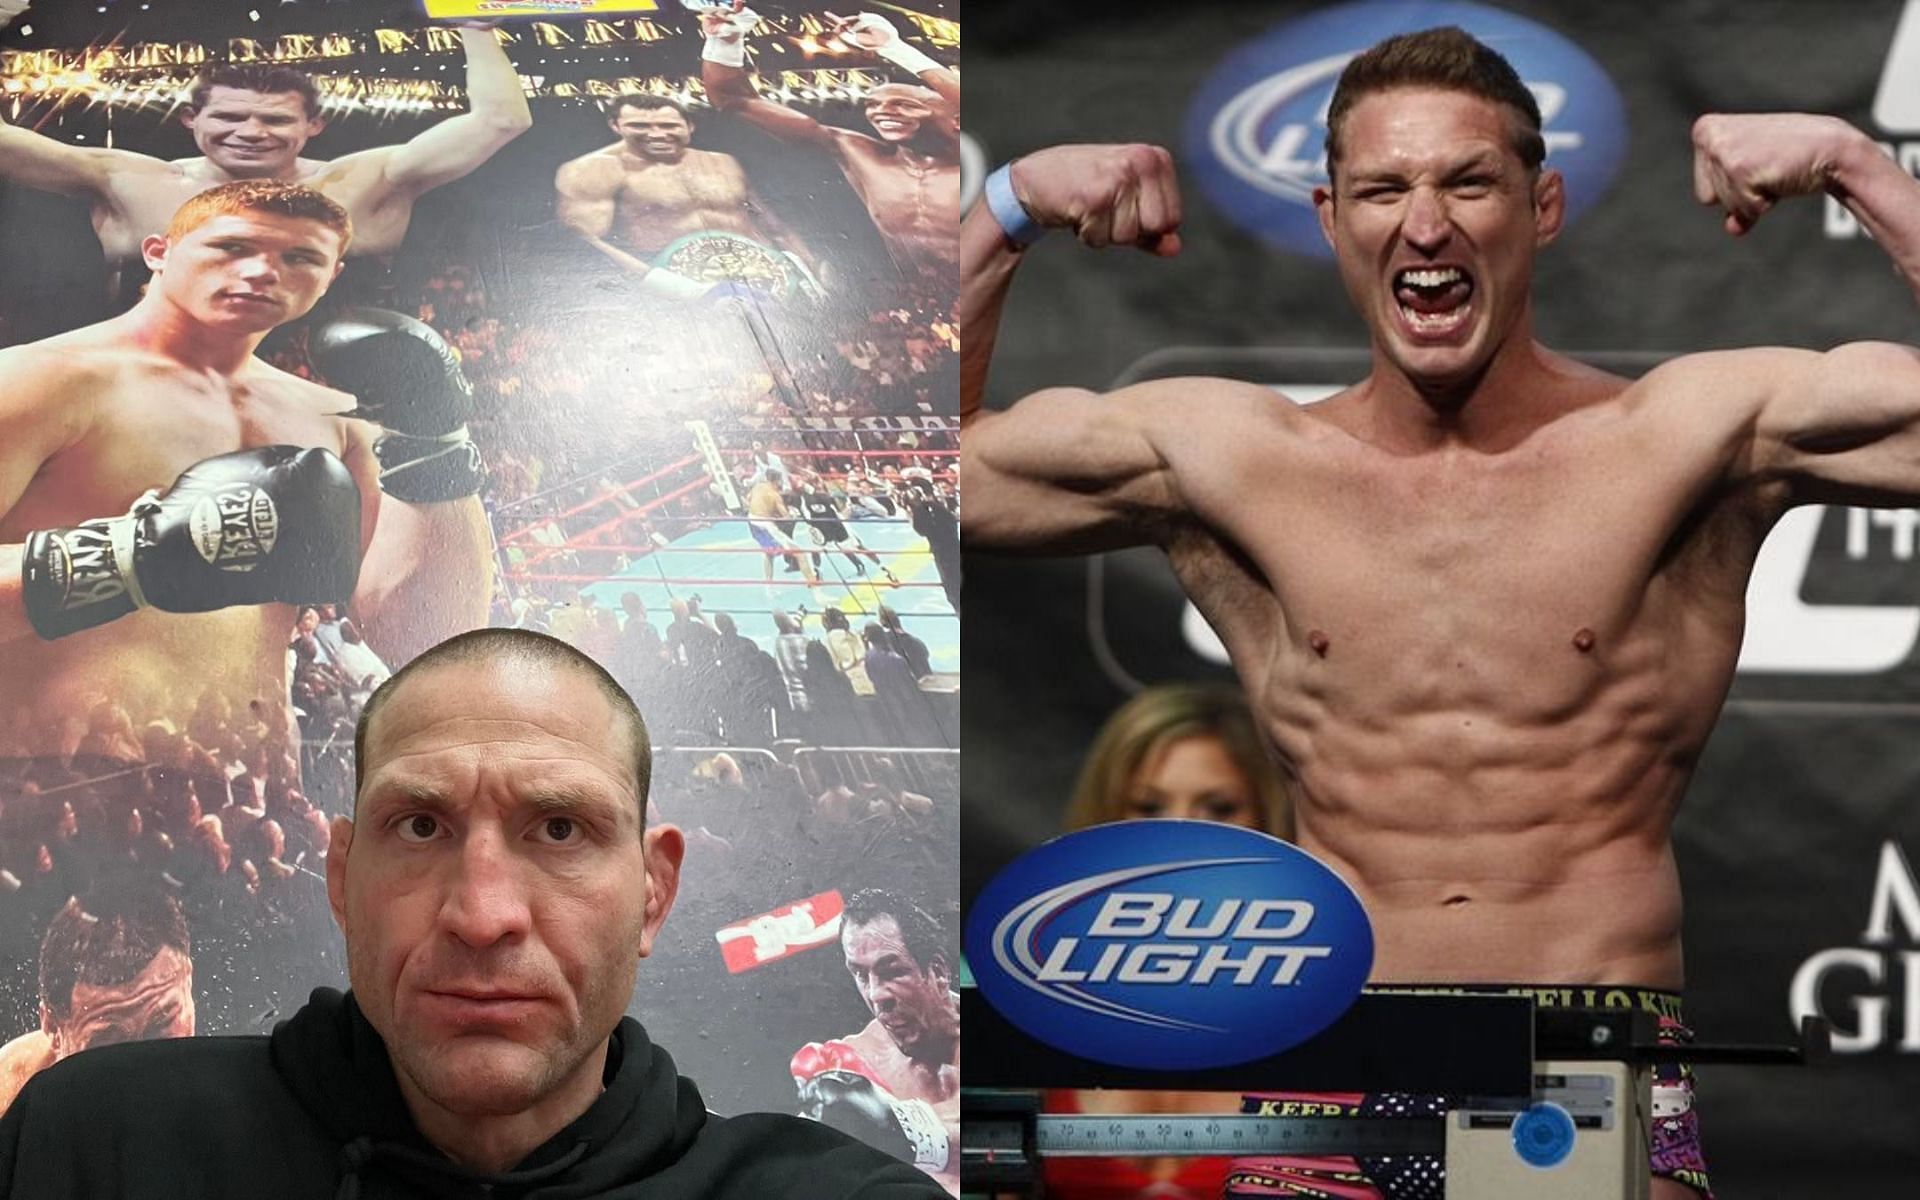 Jason Miller (left) and Jason Miller in the UFC (right) (Image credits @Madnessmma_ on Twitter and @mayhemmiller on Instagram)